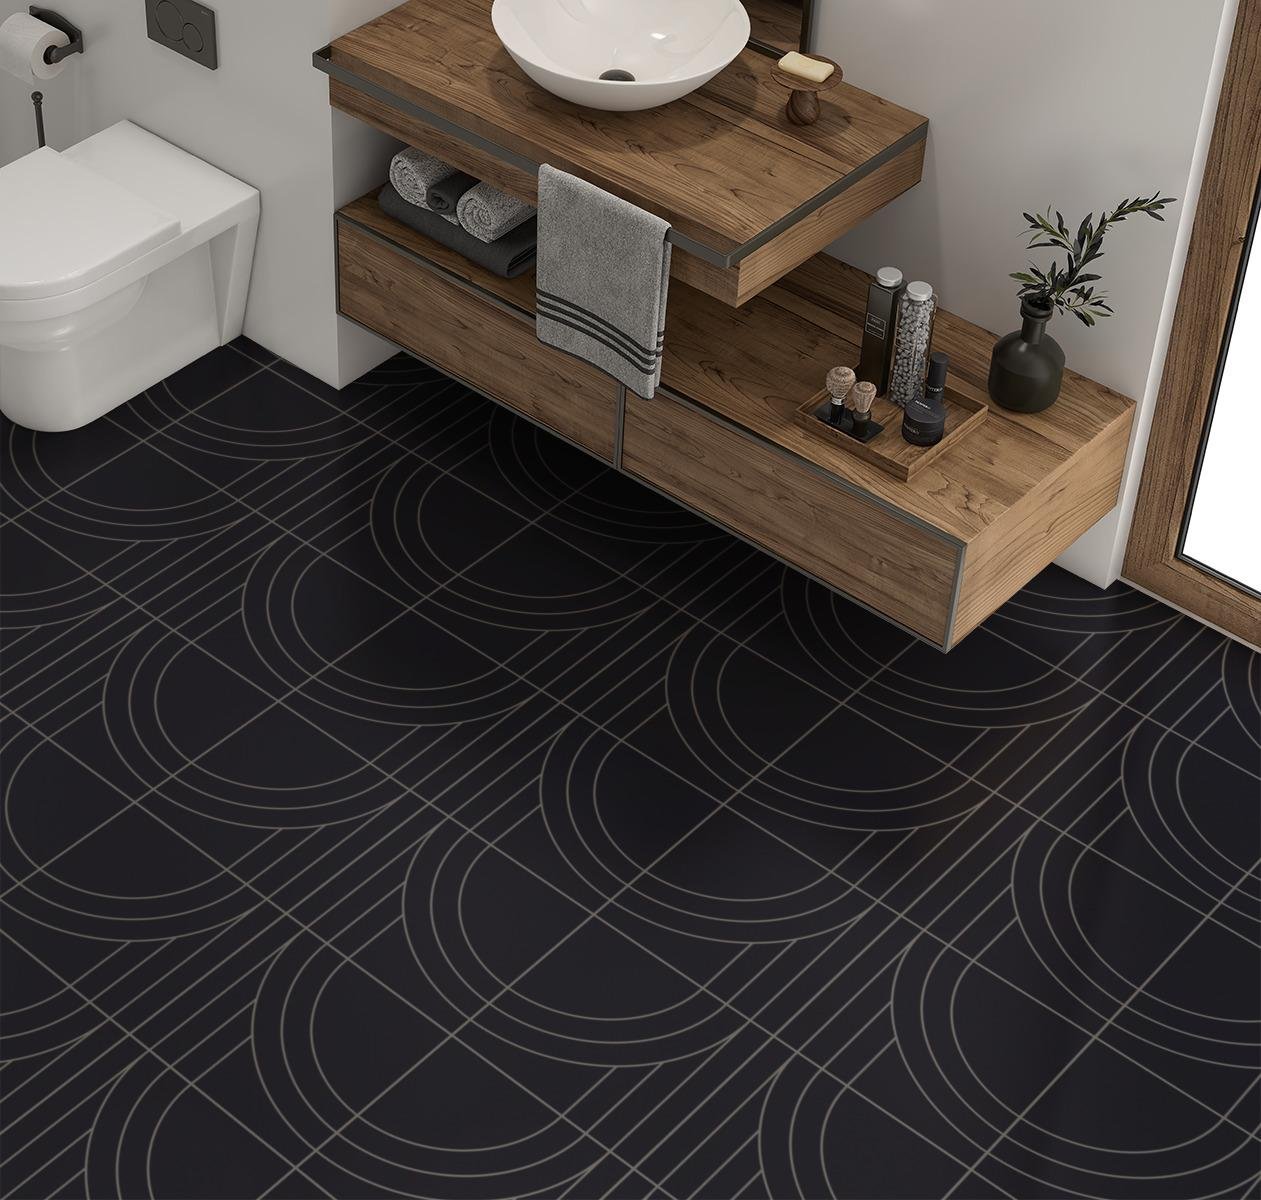 What Goes Around, Pattern A, Petite Scale, Pure Black, Gray Grout